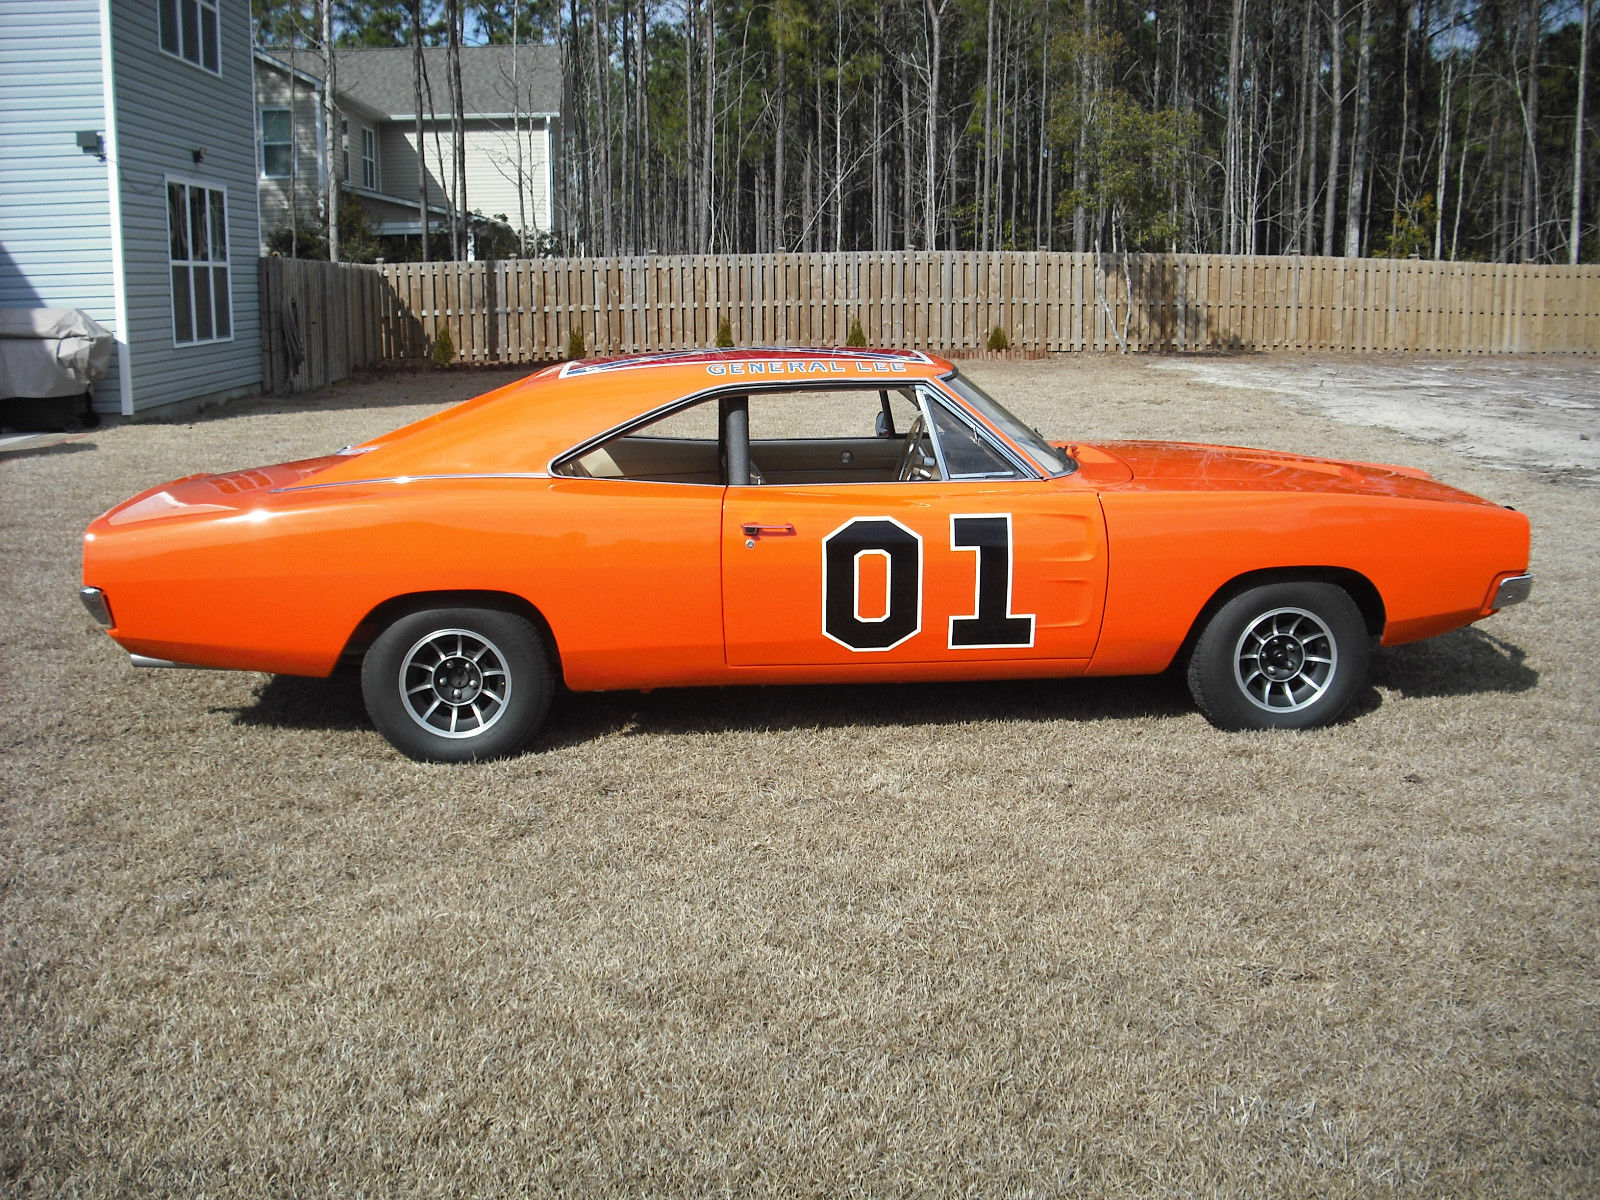 There is a pristine General Lee for sale on eBay